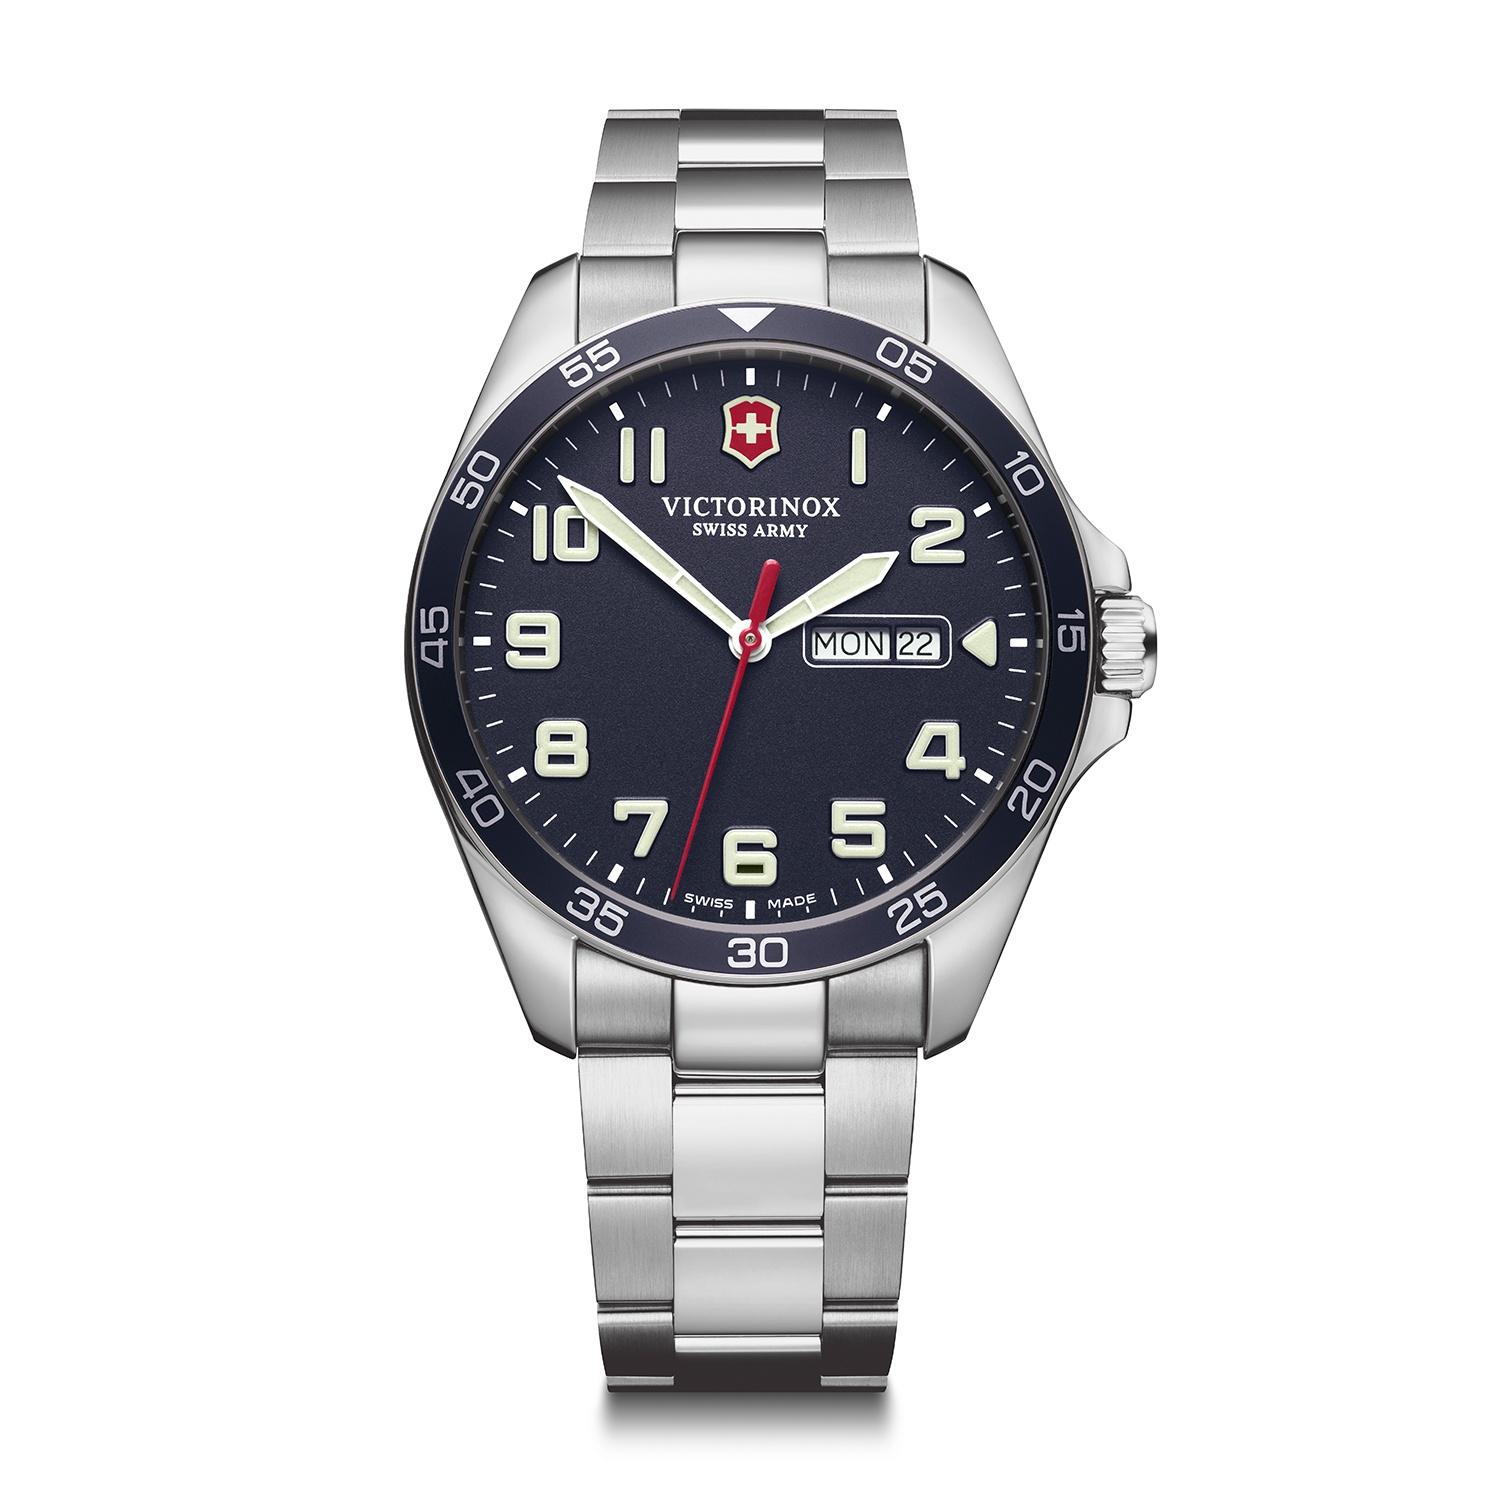 Victorinox Swiss Army Fieldforce Gent's Timepiece with Blue Dial, 42mm